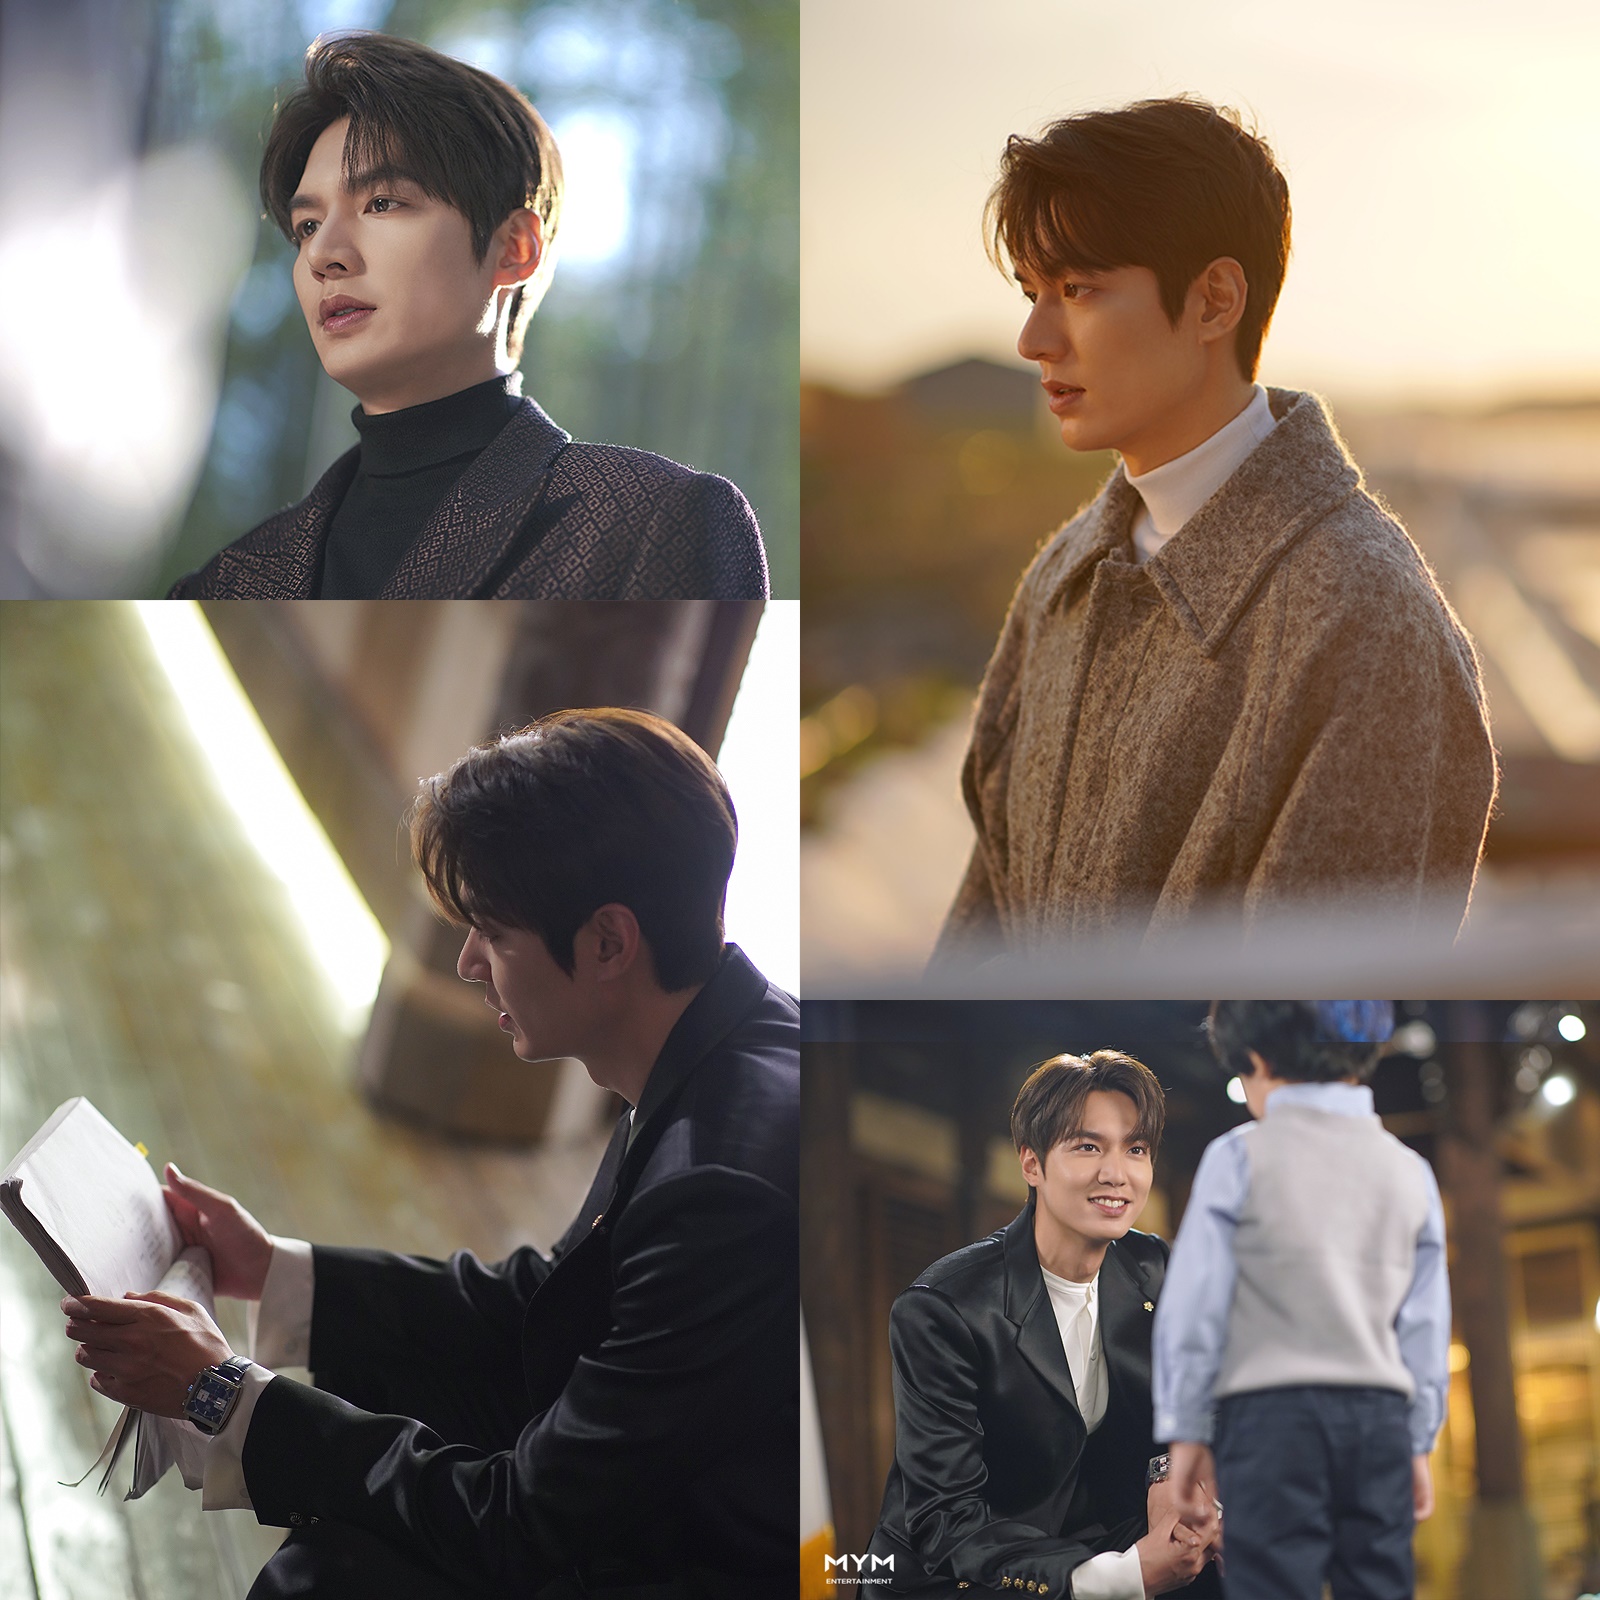 First work, it was a nourished time.Lee Min-ho delivered the closing remarks of The King, which ran for eight months without hesitation.SBS gilt drama The King: The Monarch of Eternity (playplayed by Kim Eun-sook/directed by Baek Sang-hoon and produced by Jung Ji-hyun/produced Hwa-An-Dam Pictures) ended with 16 episodes of broadcast on the 12th.Lee Min-ho, who killed Lee Lim (Lee Jung-jin) and made the mission of Emperor in 26 years, later shared daily life with Tae-eul (Kim Go-eun), who was reunited again, and traveled several parallel worlds, and finished with a long afterlife with happiness of each day.Lee Min-ho, who was divided into the Korean Empire Empire Emperor, digested the character with visual and acting power optimized for fantasy romance.With his life, Protect proved the power of the irreplaceable title, from a straight-line romance to a cool charisma as a military commander, to a fantastic uniform and action skills.Lee Min-ho said, This work is threetiesIt is a work that started as an actor of the future, and it seems to be remembered as a time of nourishment to decorate one page in the future.Above all, it was good to be able to breathe again in the field for a long time with the artist, the director, and the good actors, and it seems to remain in memory for a long time because it is a work that has worked more deeply in the field than ever before. Lee Min-ho said, I would like to express my deep gratitude to the fans and viewers who have waited for a long time. I hope that you will be healthy and not tired at this time, and I hope you will walk your chosen path nicely.I will also do my best every moment and take a step firmly. 